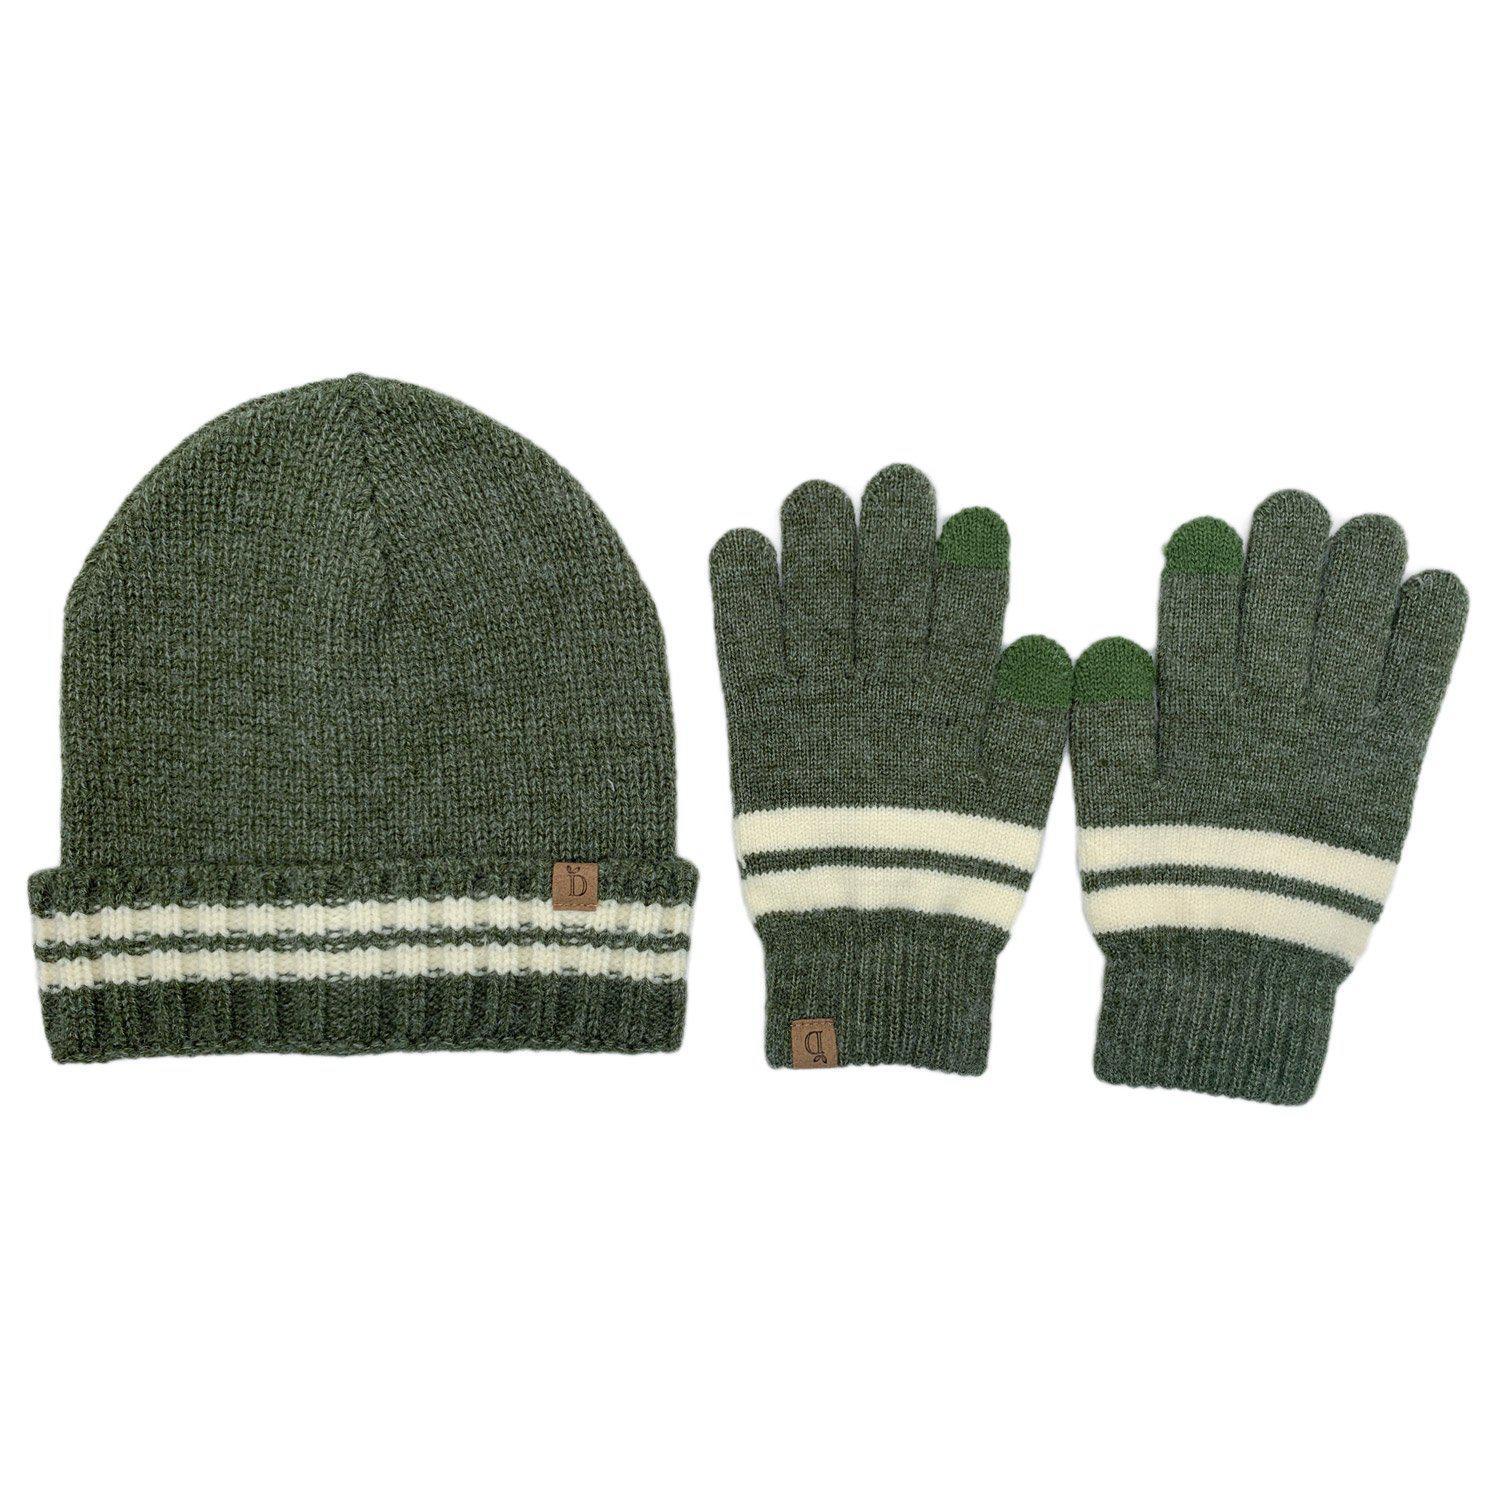 Empire Cove Winter Set Knit Striped Beanie and Touch Screen Gloves Gift Set-Hat/gloves-Empire Cove-Blue-Casaba Shop